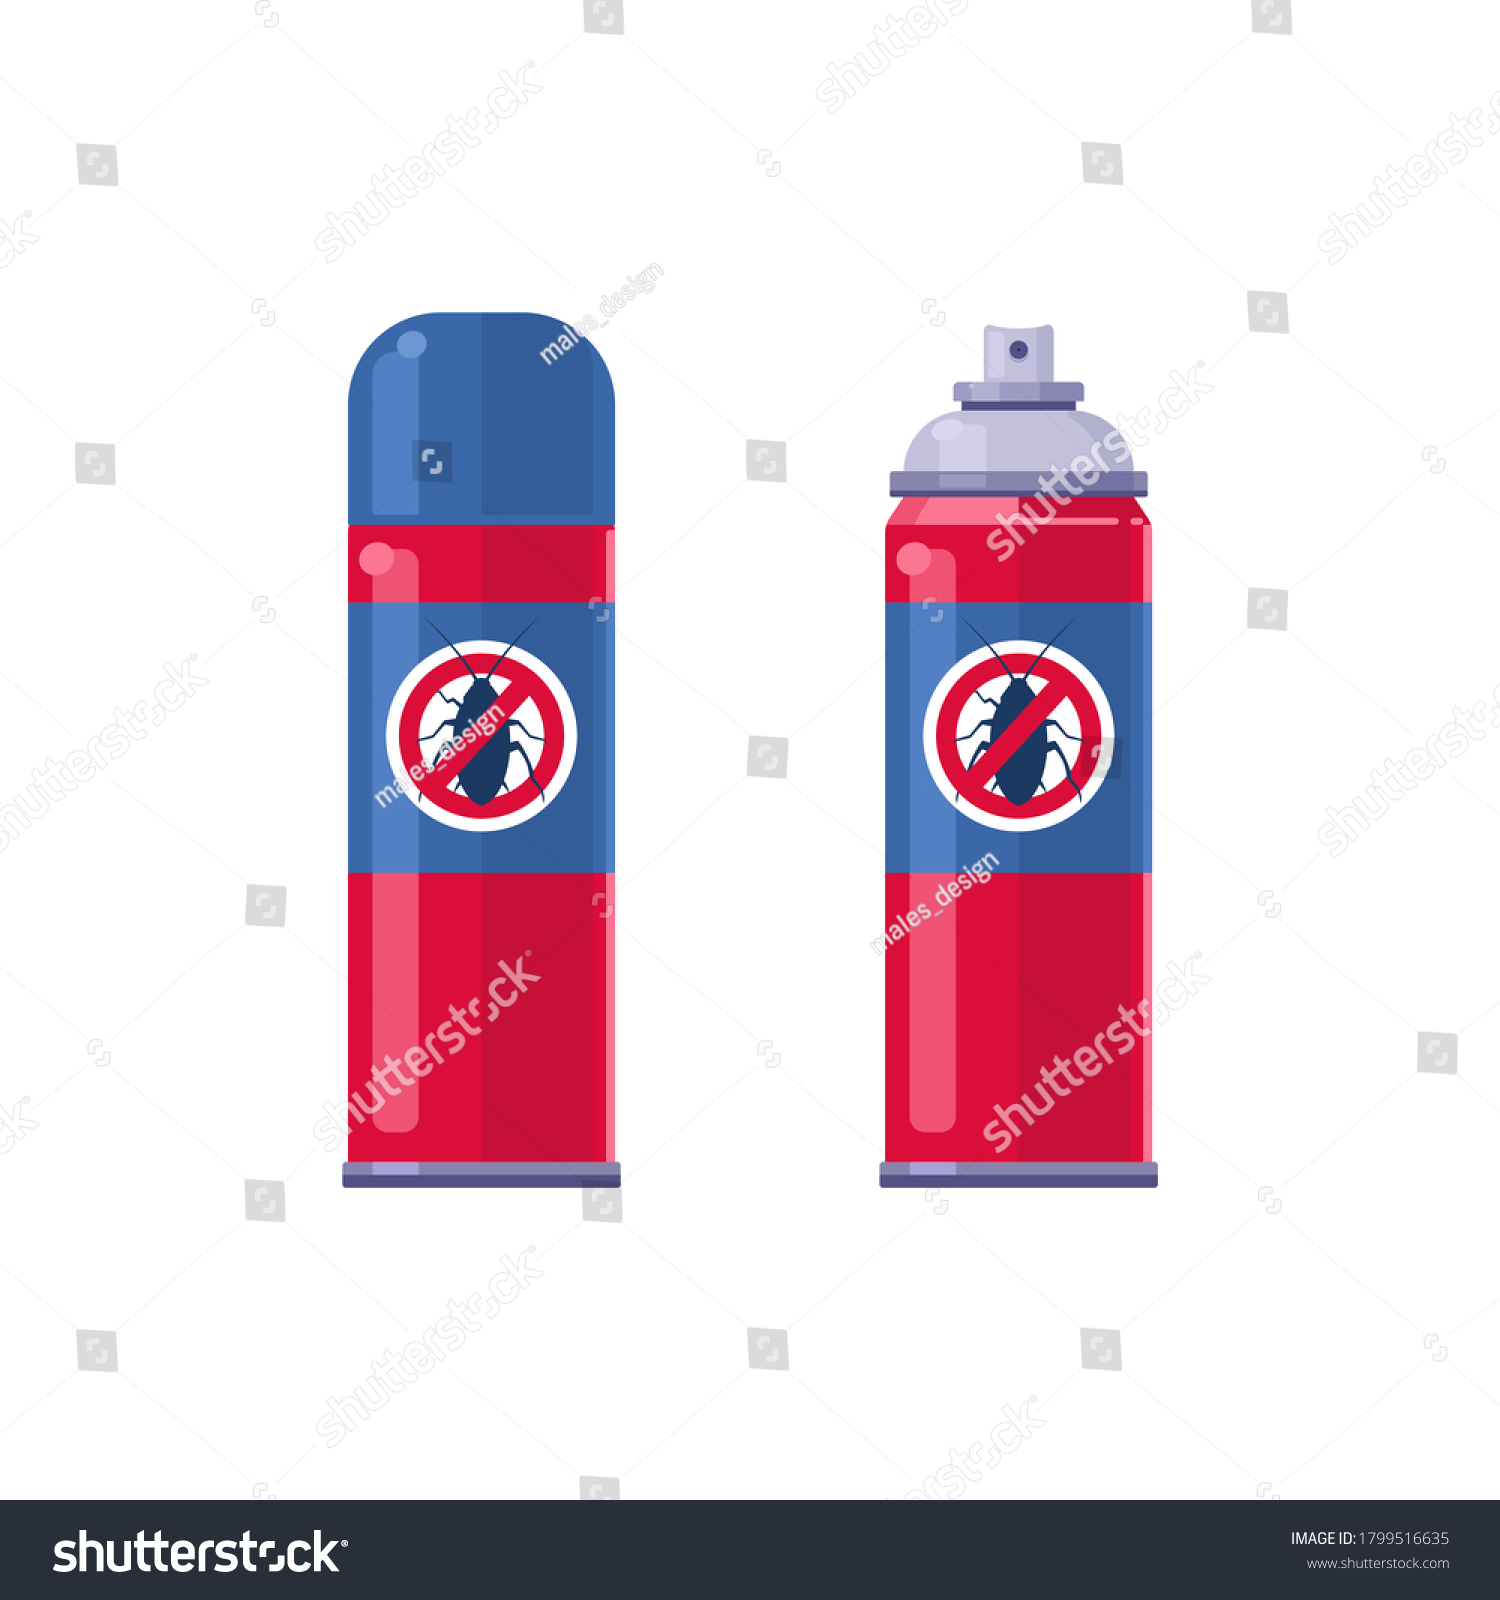 SVG of Poison spray bottles. Toxins, insecticides, pesticides, biocides with hazard warning signs. Caution poisonous. Isolated vector on white background svg